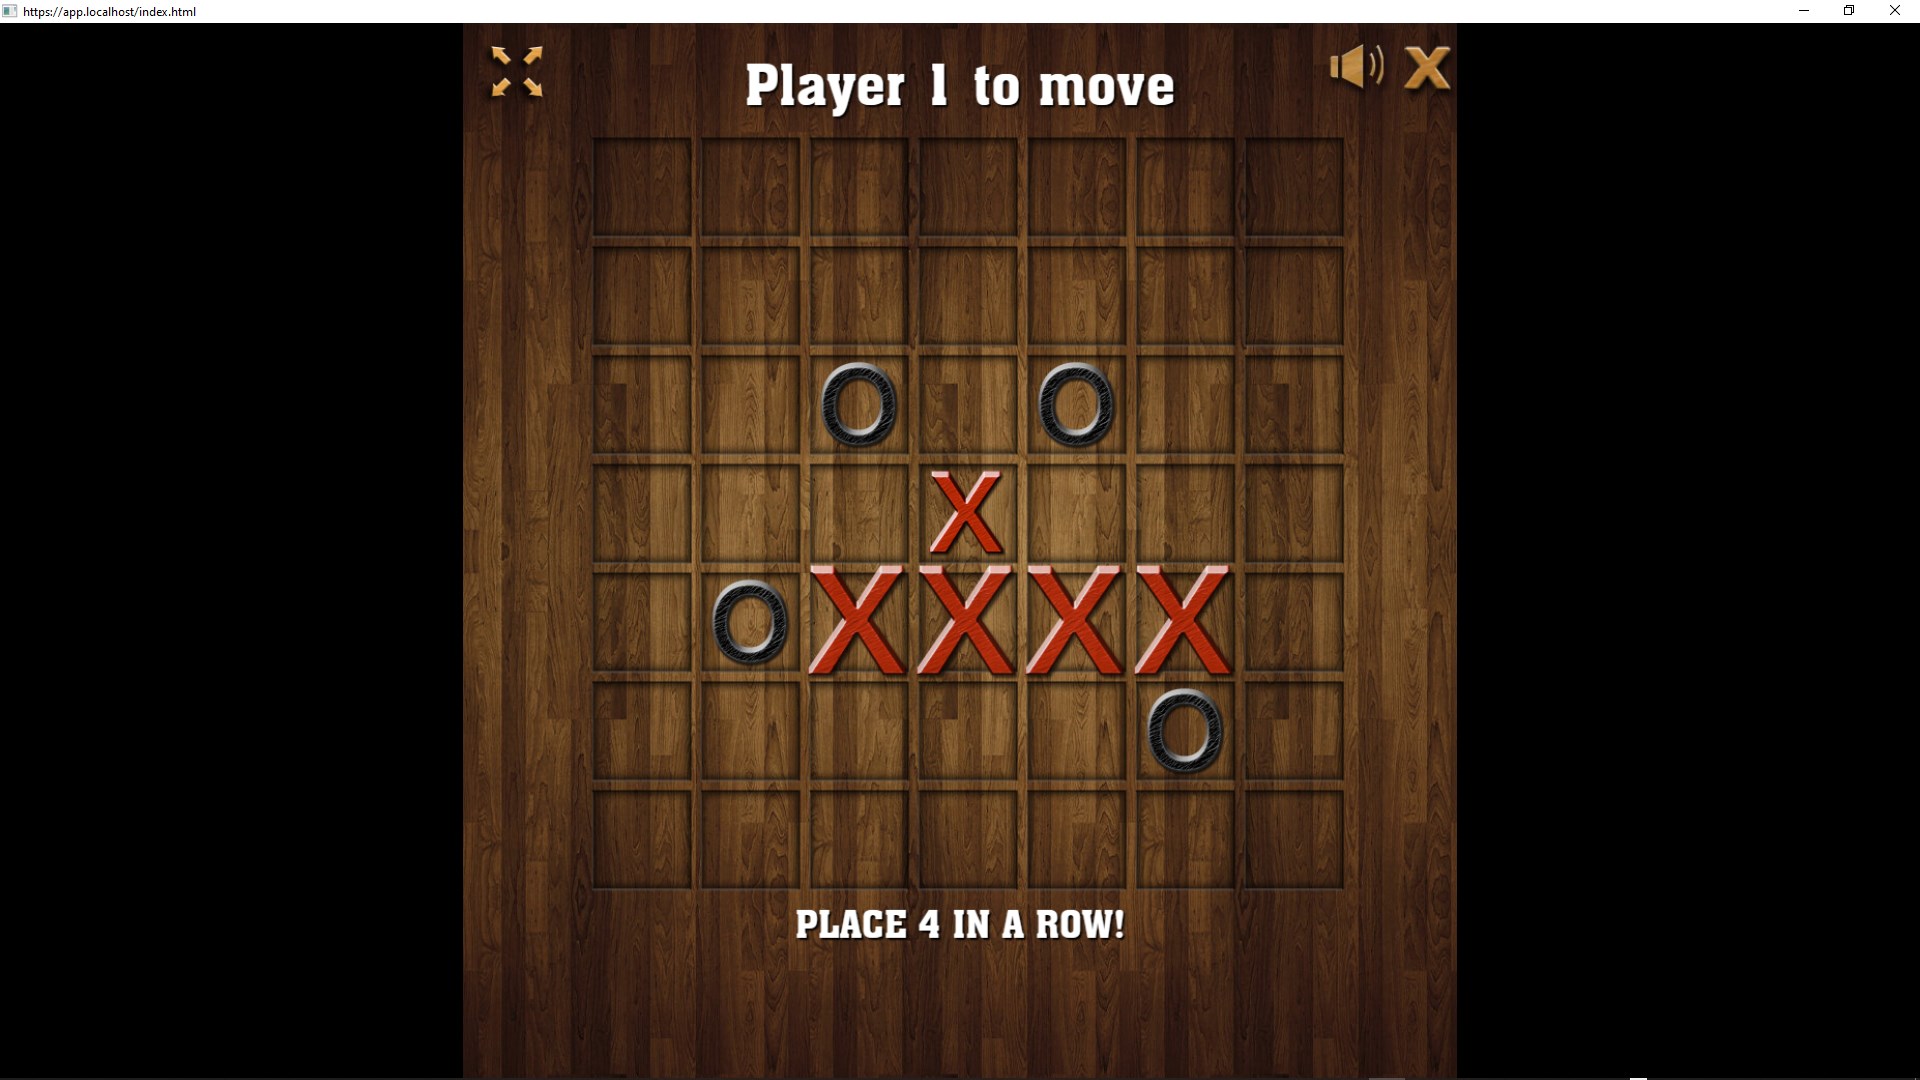 Tic Tac Toe - online game on the App Store